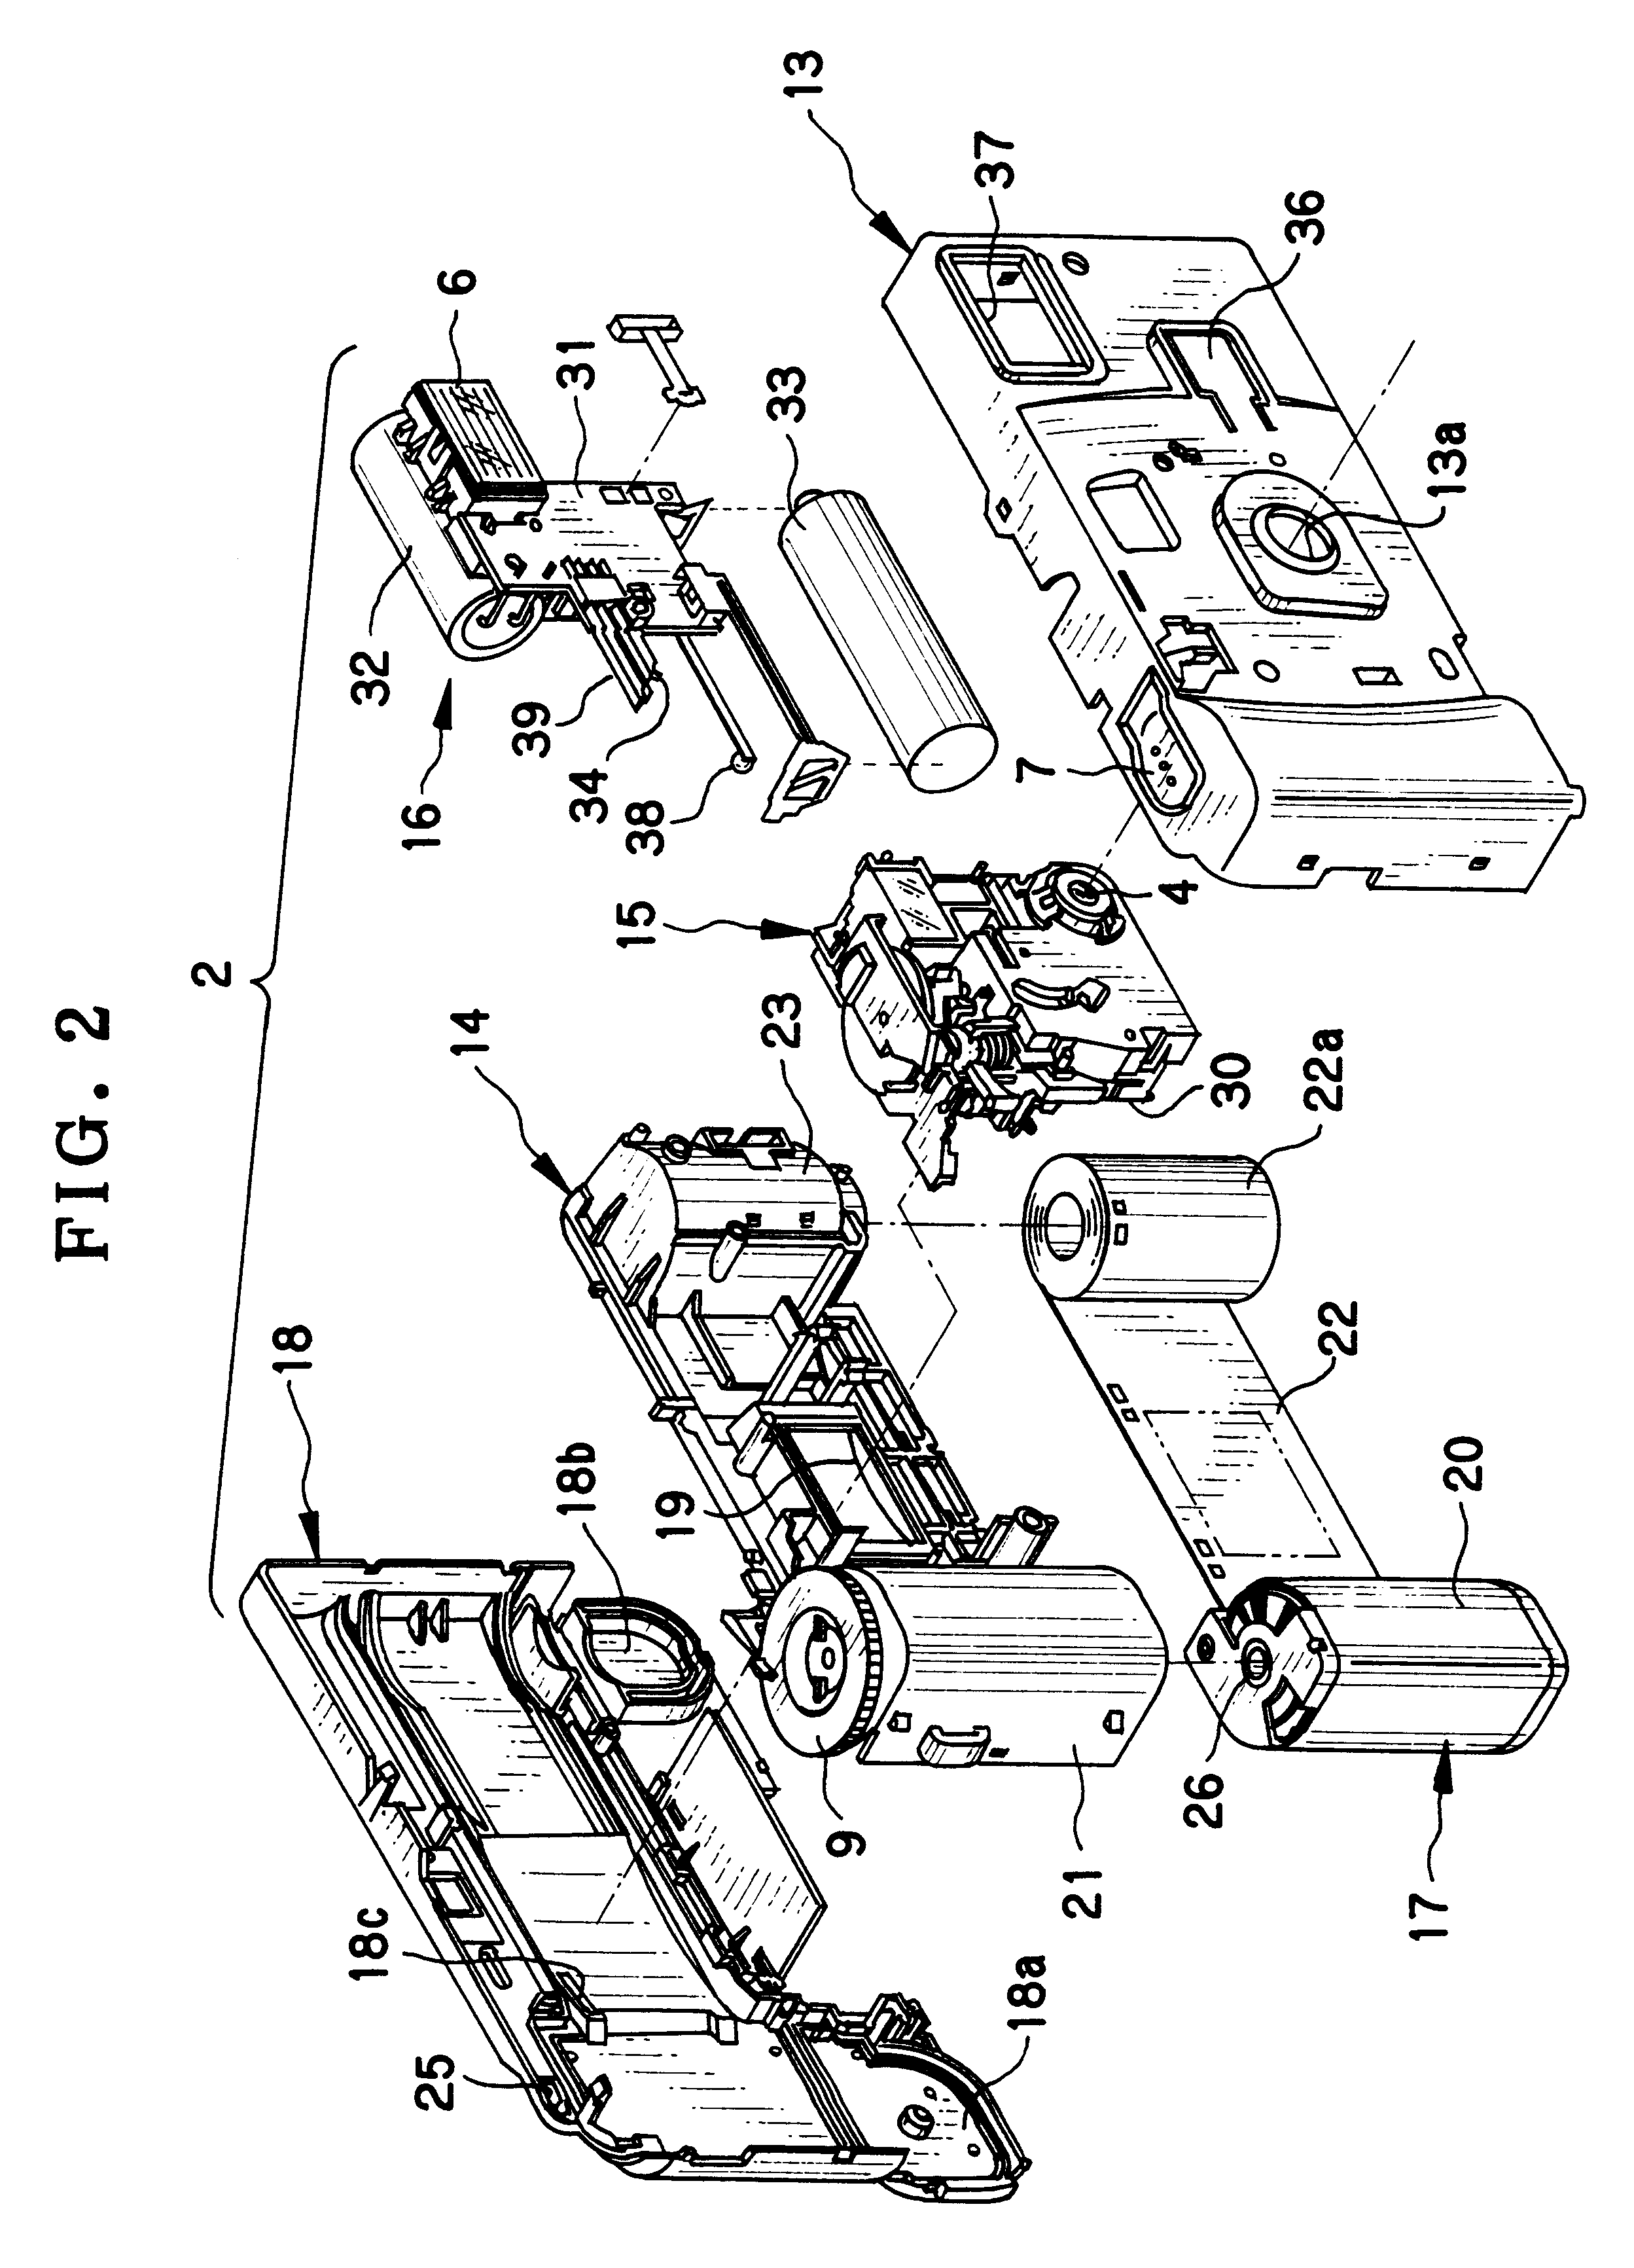 Lens-fitted photo film unit and method of producing photographic print